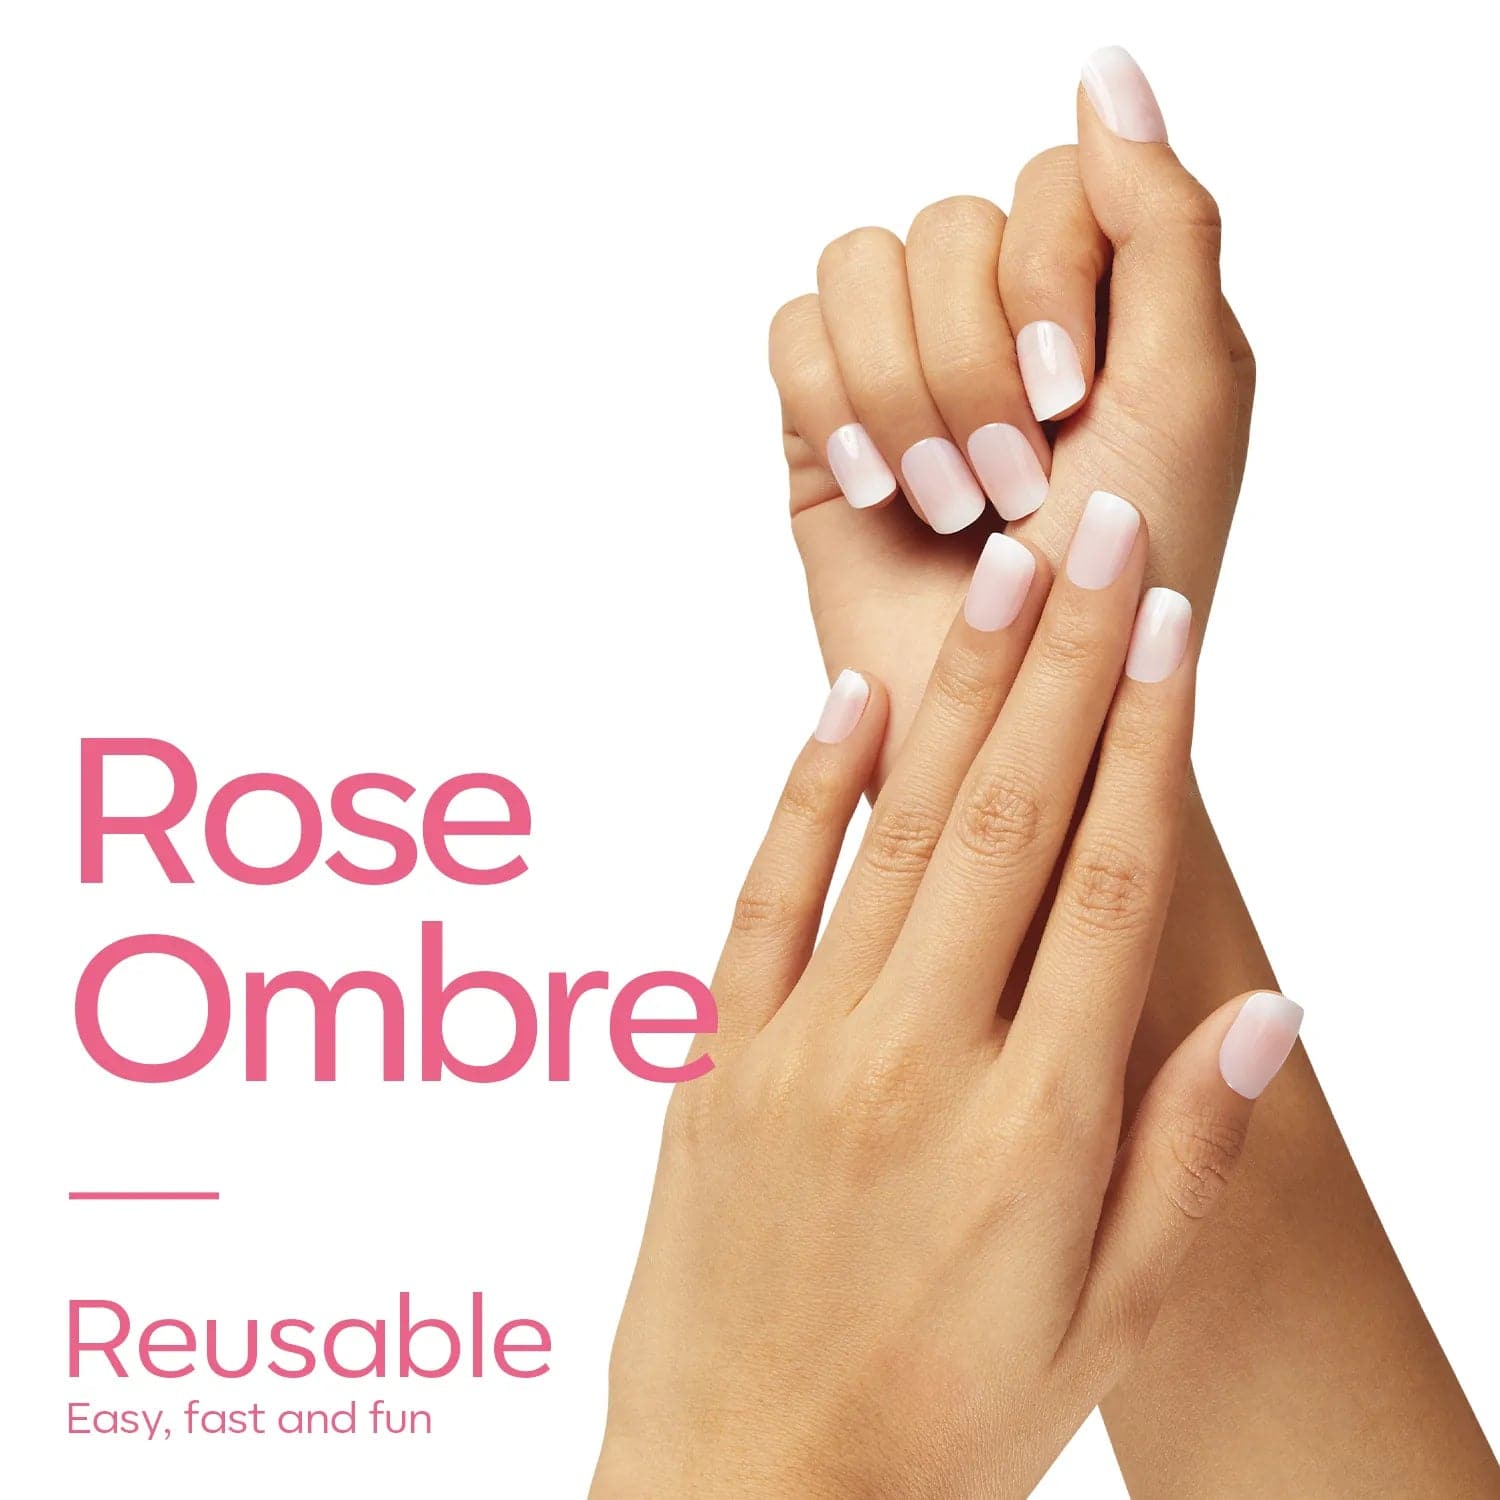 Rose Ombre - 24 Fake Nails 12 Sizes Short Squoval Press on Nails Kit